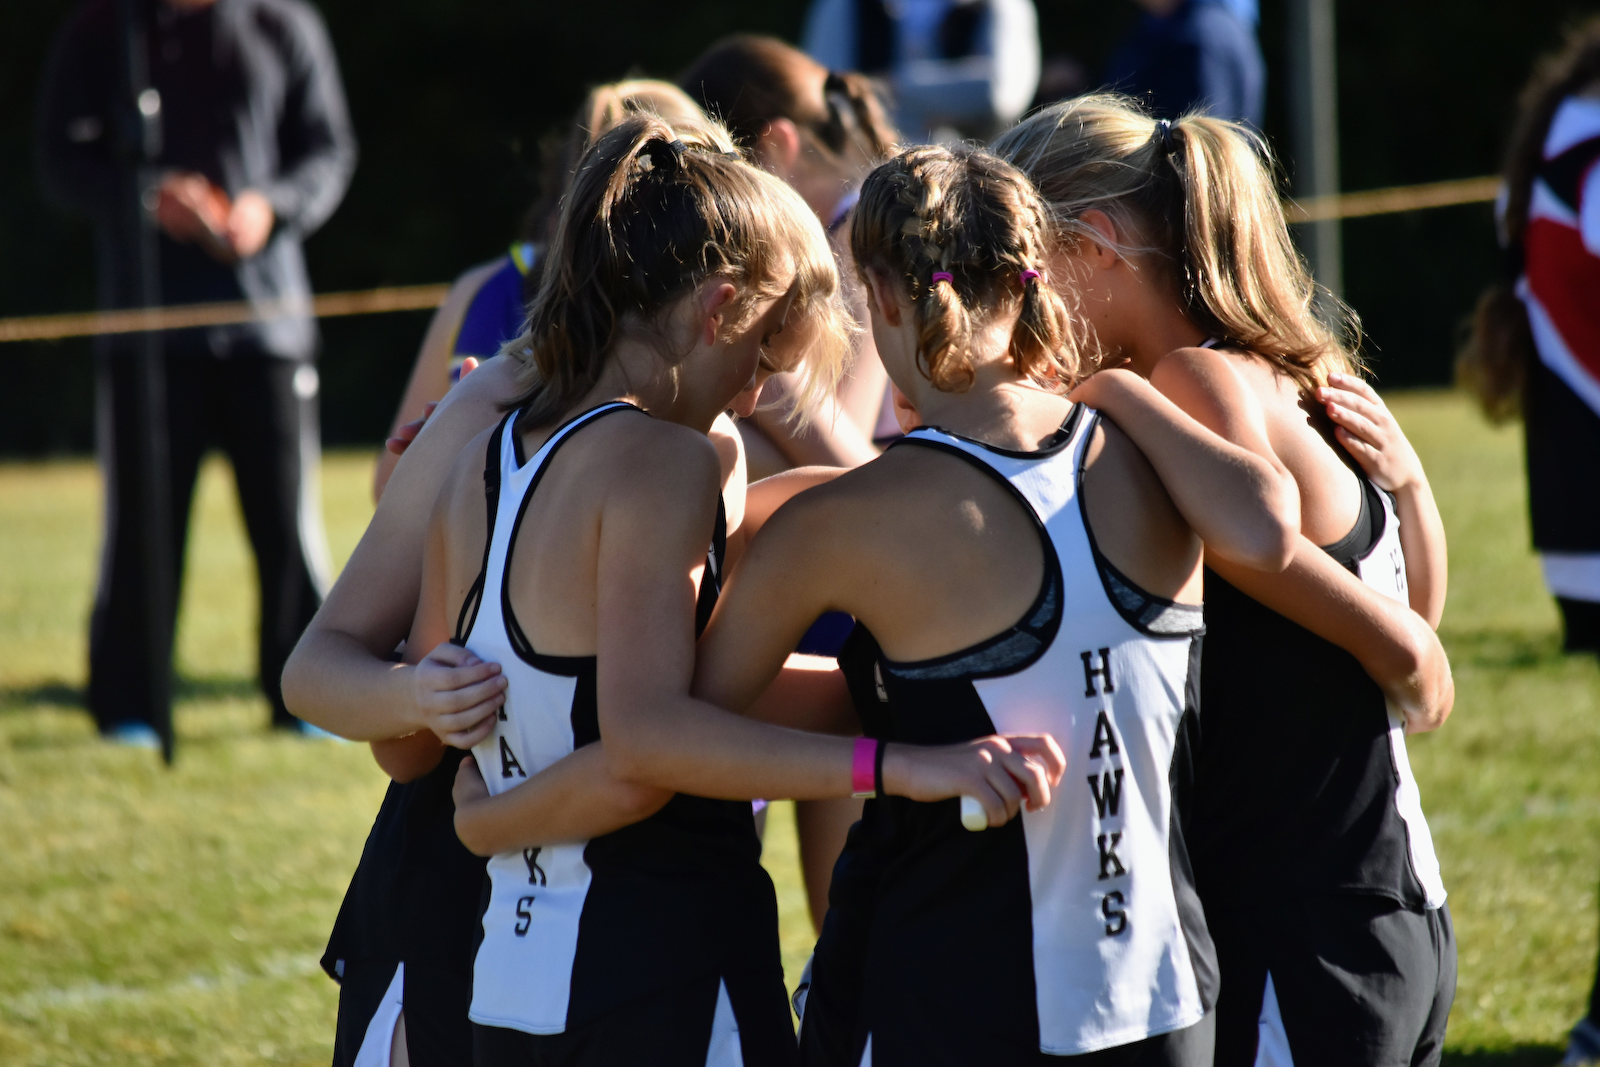 Running Blackhawks compete at 2022 Patoka Lake Athletic Conference Meet gallery cover photo